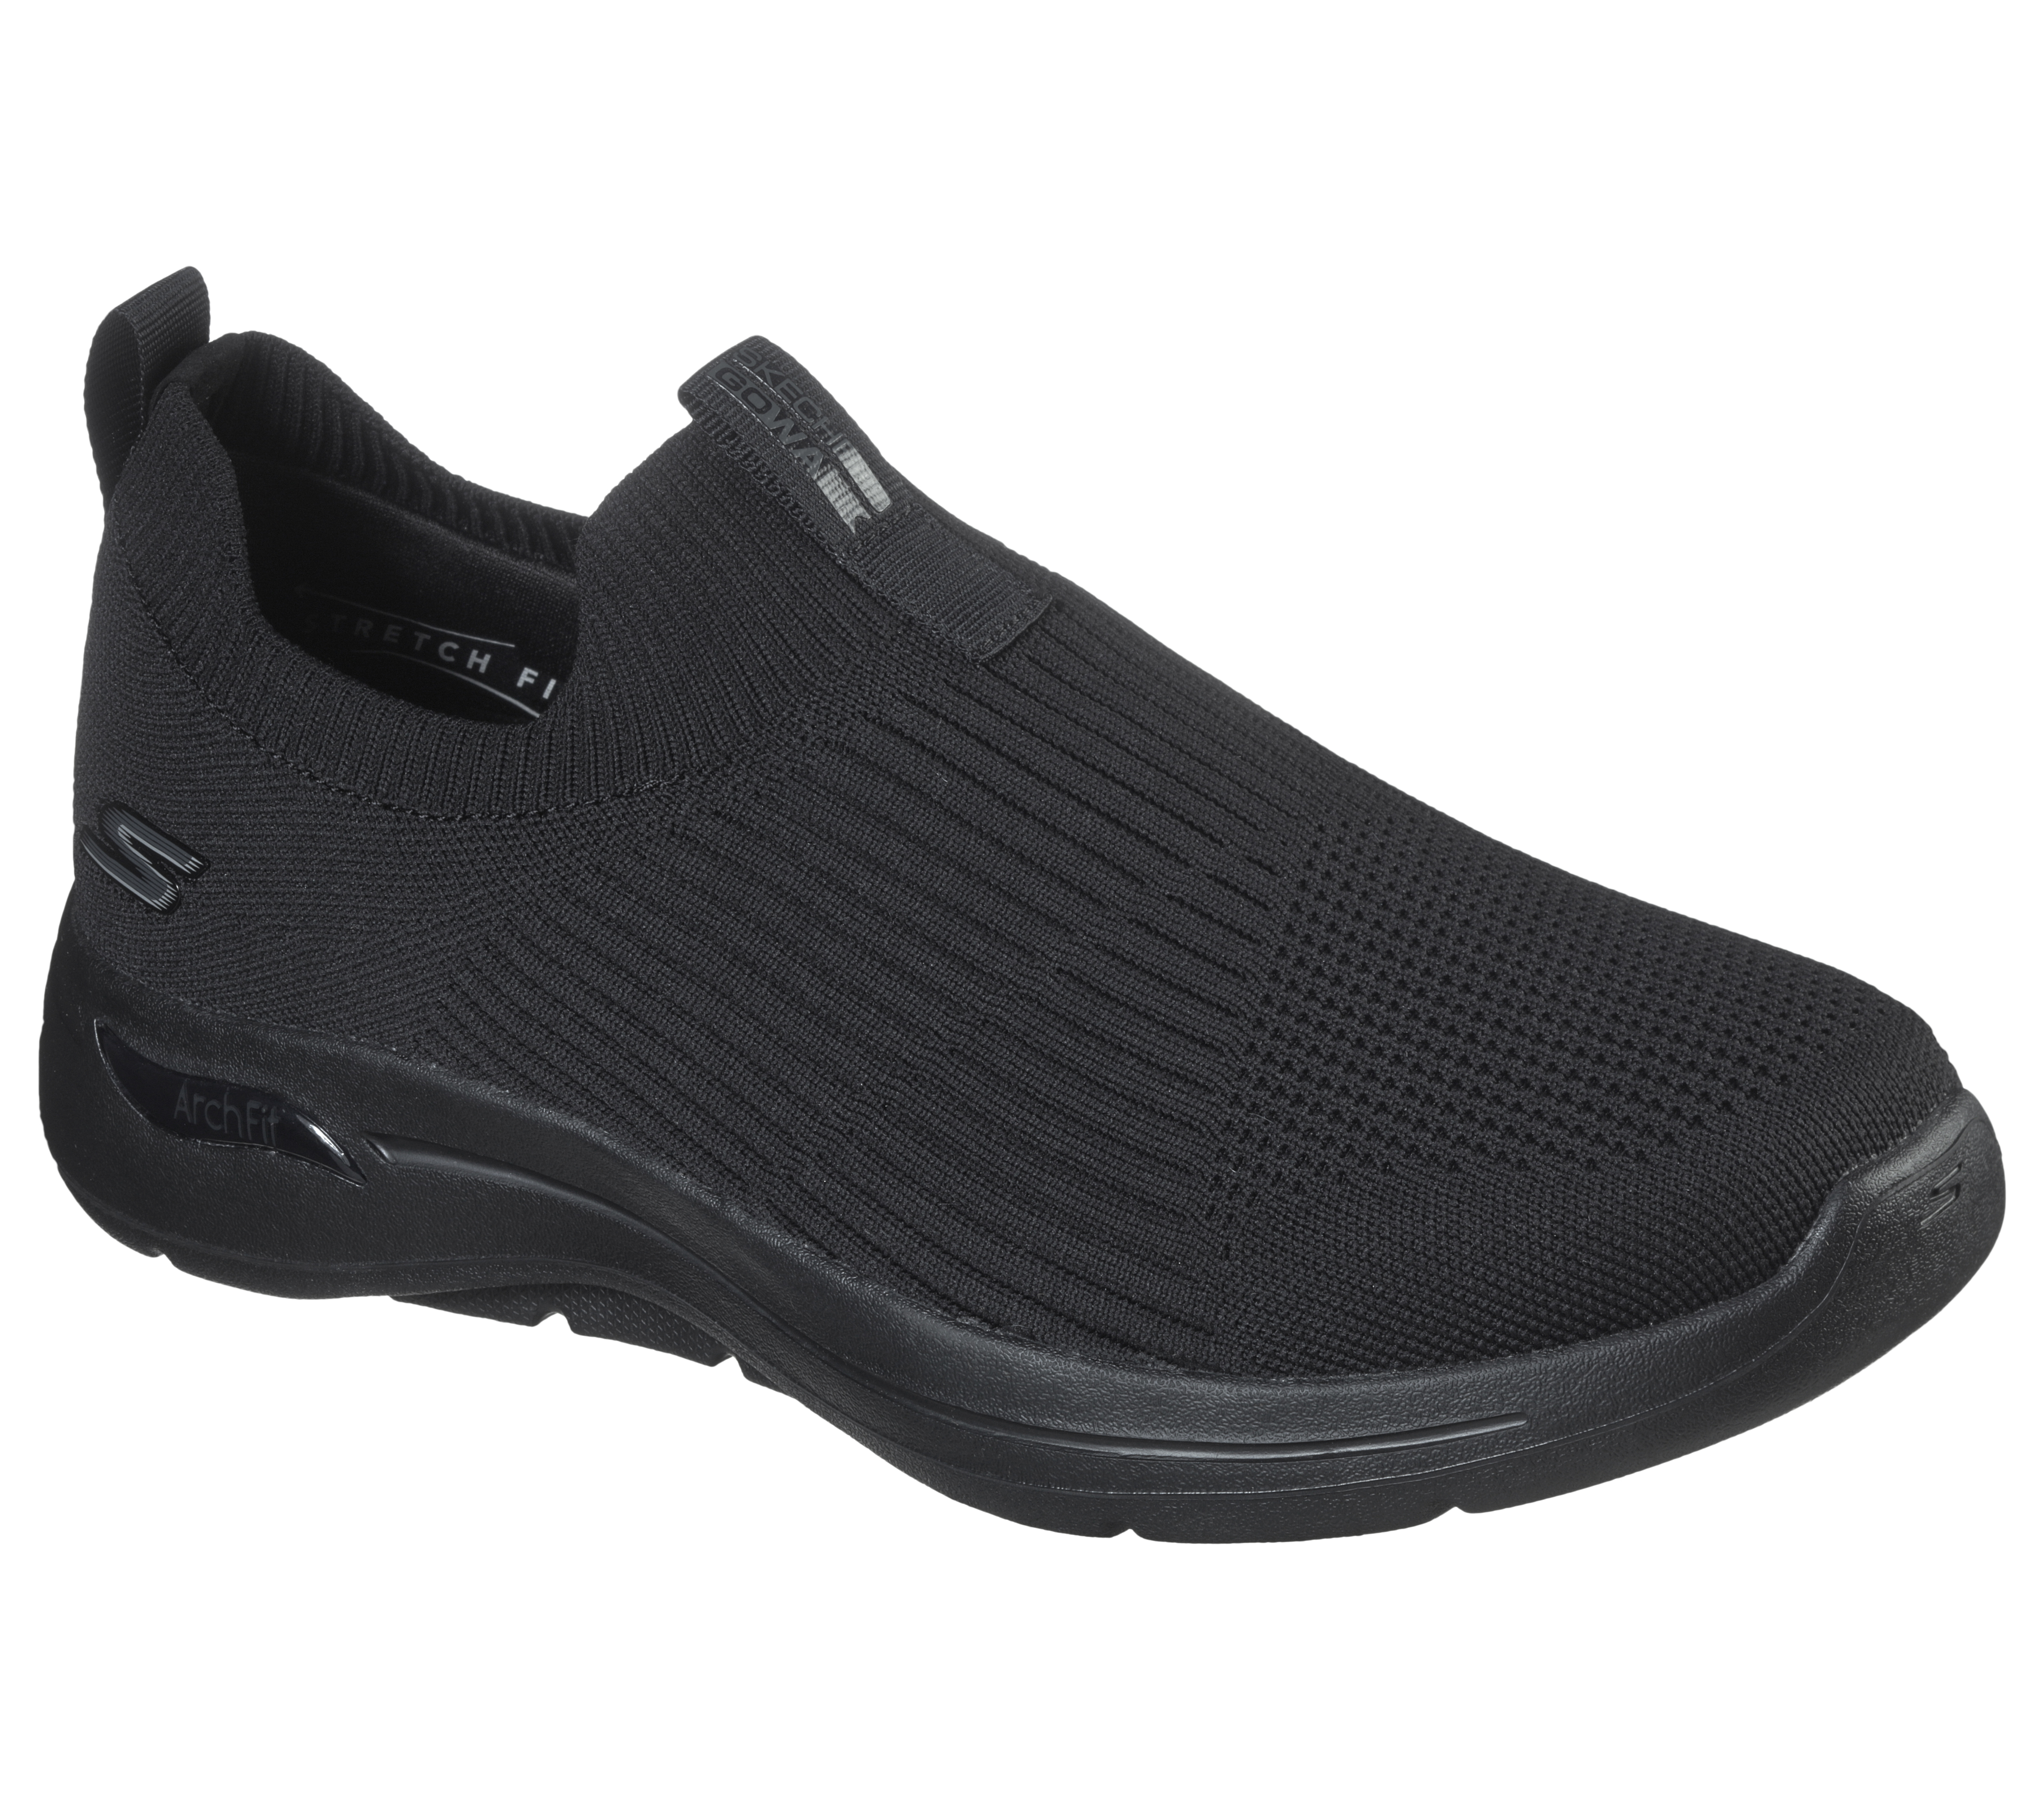 GO WALK Arch Fit Iconic SKECHERS UK